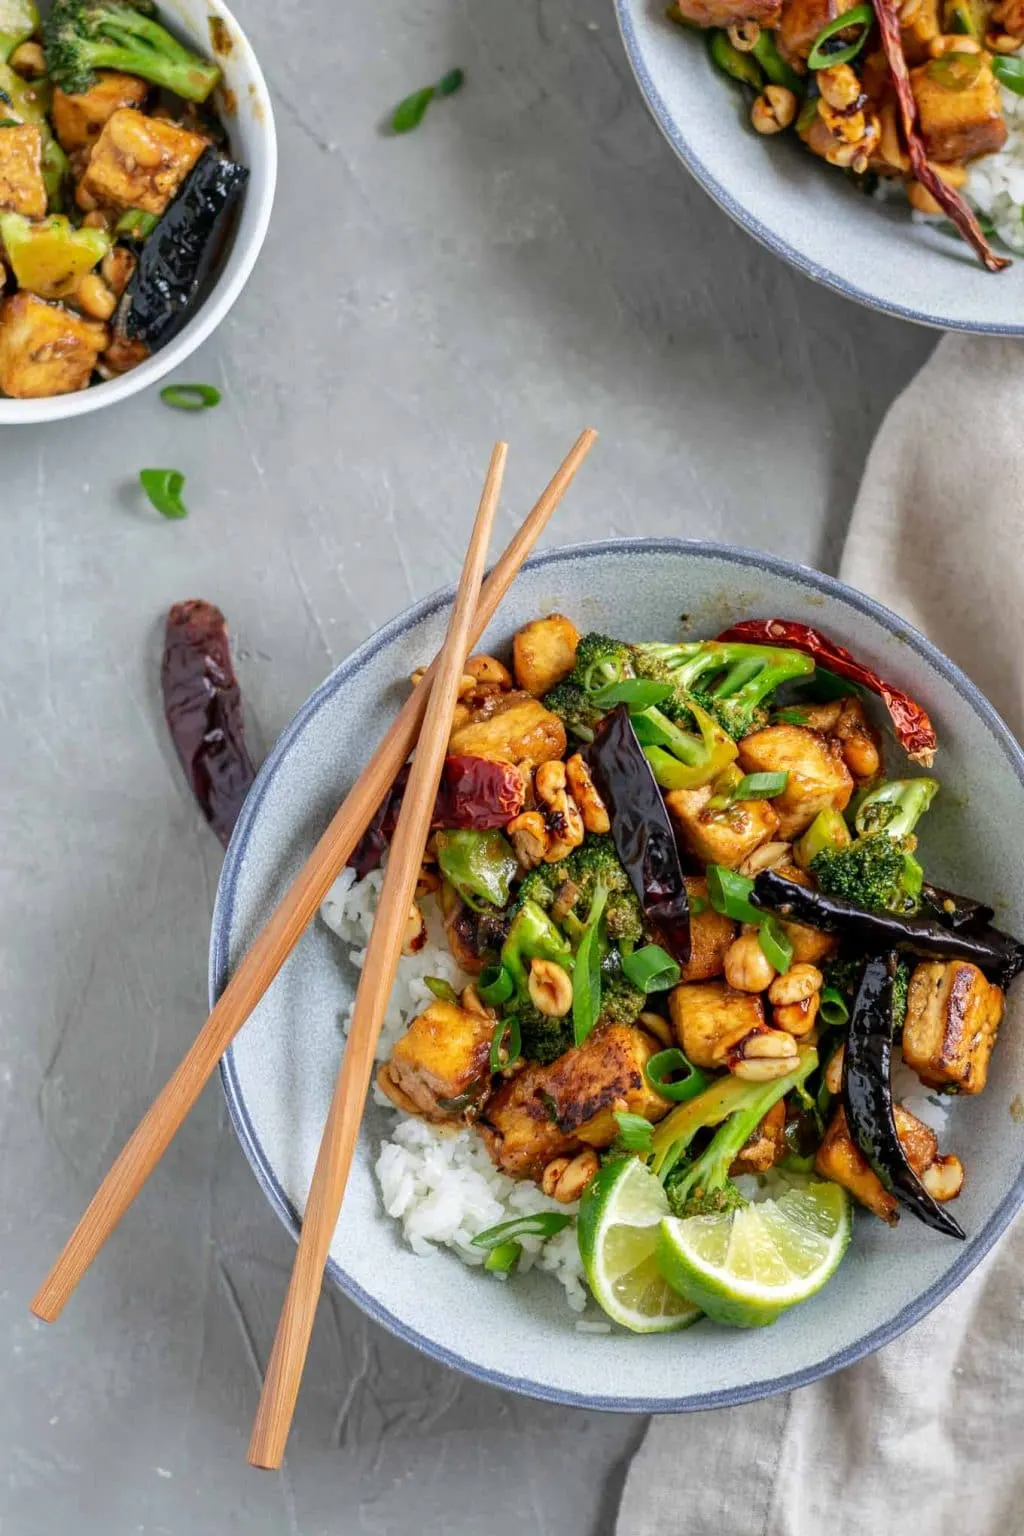 vegan kung pao tofu with broccoli and jasmine rice. Garnished with lime wedges and scallion greens and a pair of chopsticks is set over the bowl